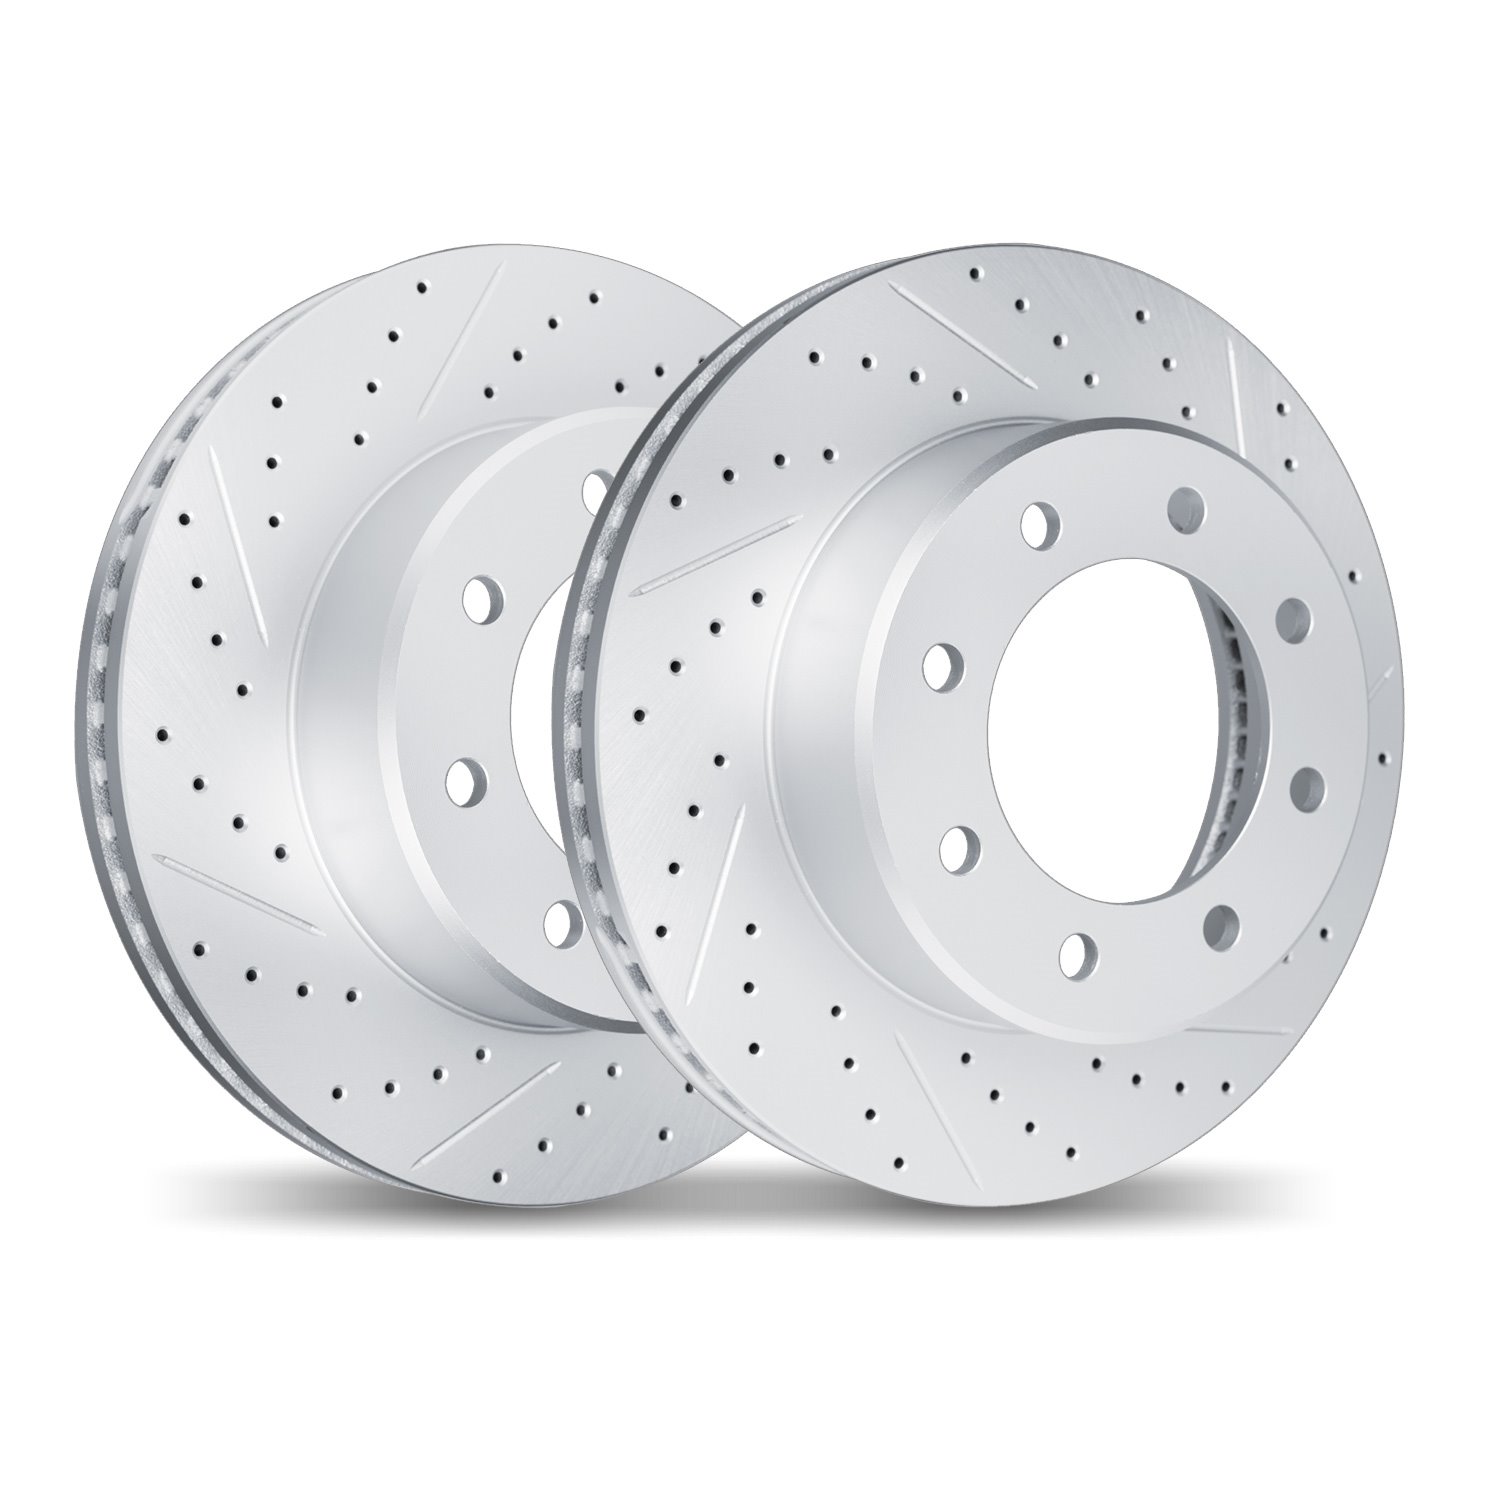 2002-54062 Geoperformance Drilled/Slotted Brake Rotors, 2005-2007 Ford/Lincoln/Mercury/Mazda, Position: Front